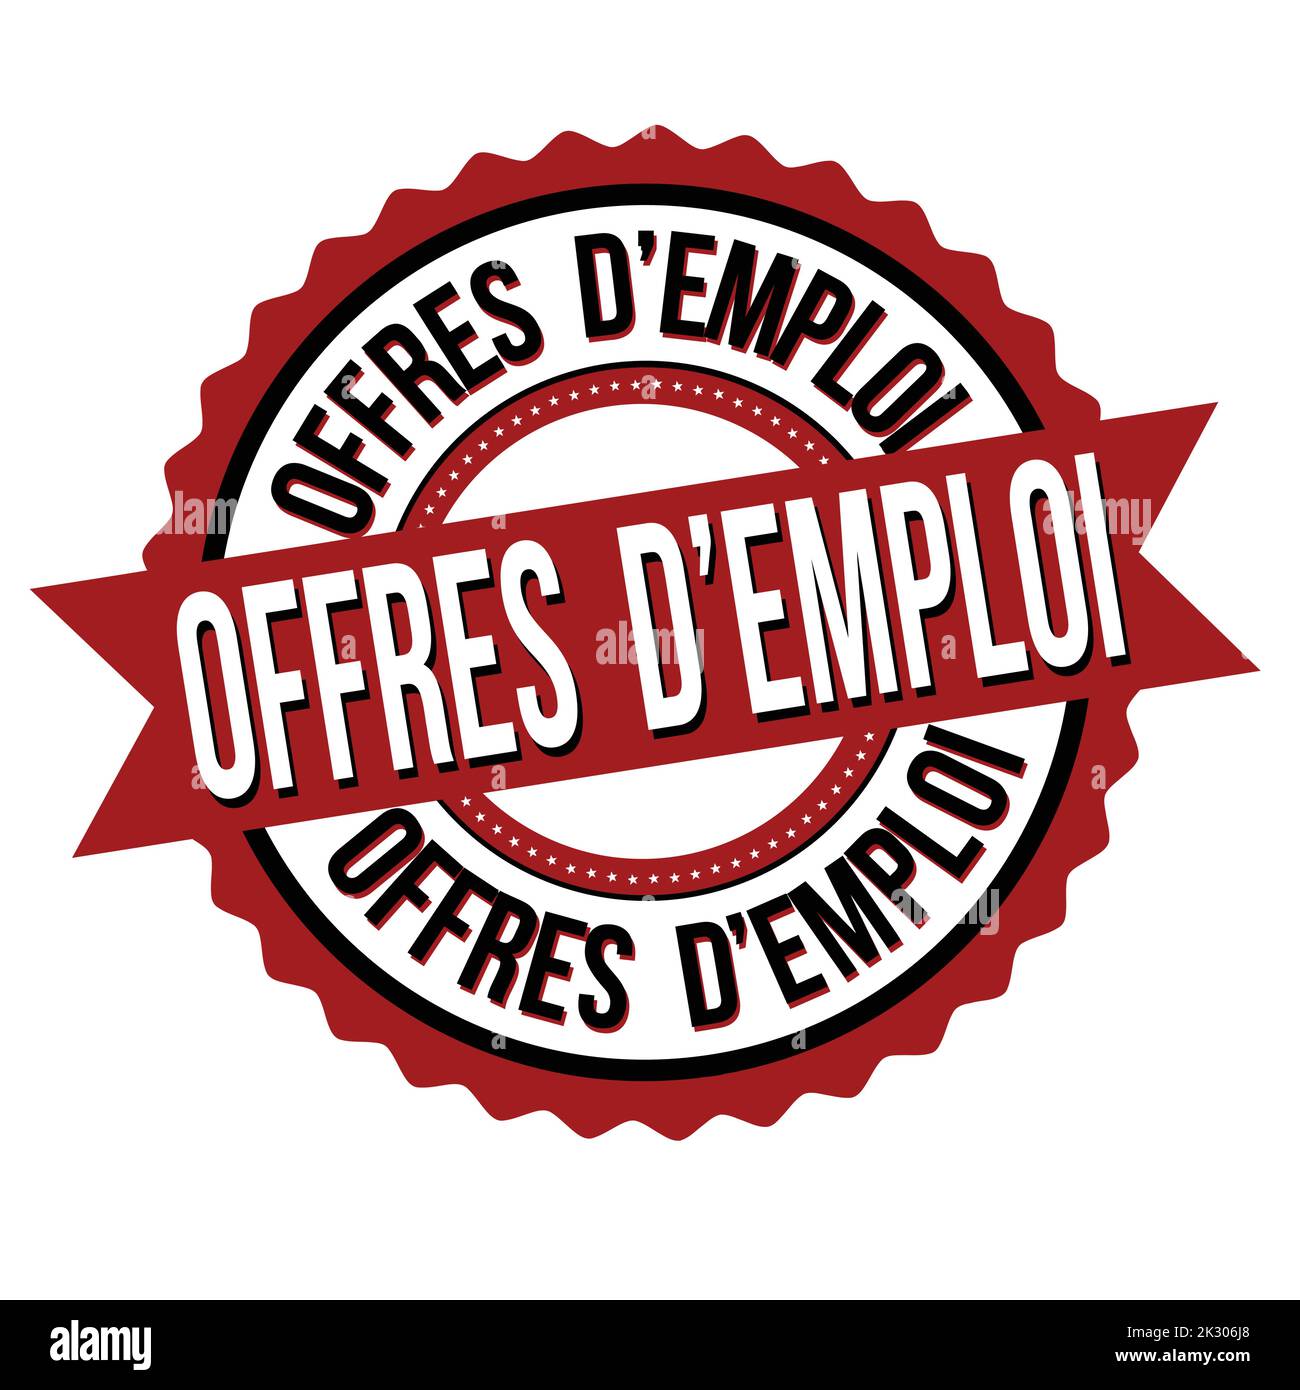 Job offers ( Offres d'emploi - in french language ) label or stamp on white background, vector illustration Stock Vector